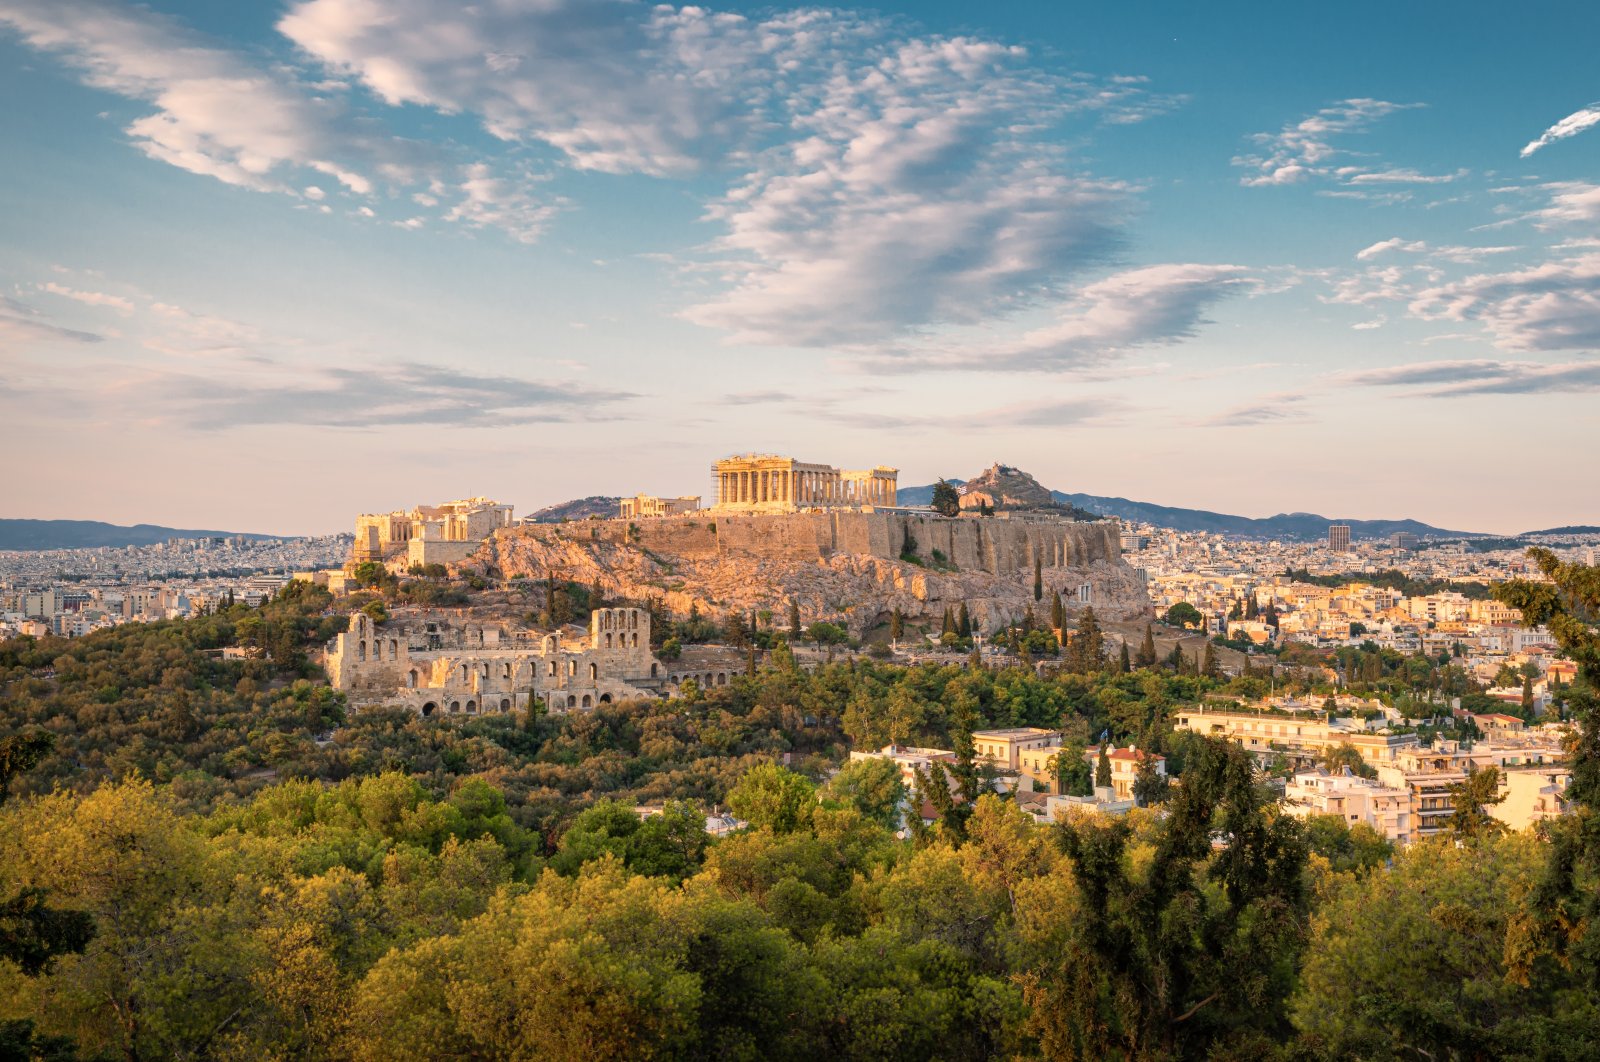 The Acropolis of Athens is an ancient citadel located on a rocky outcrop above the city of Athens, Greece, Aug, 22, 2021. (Getty Images Photo)